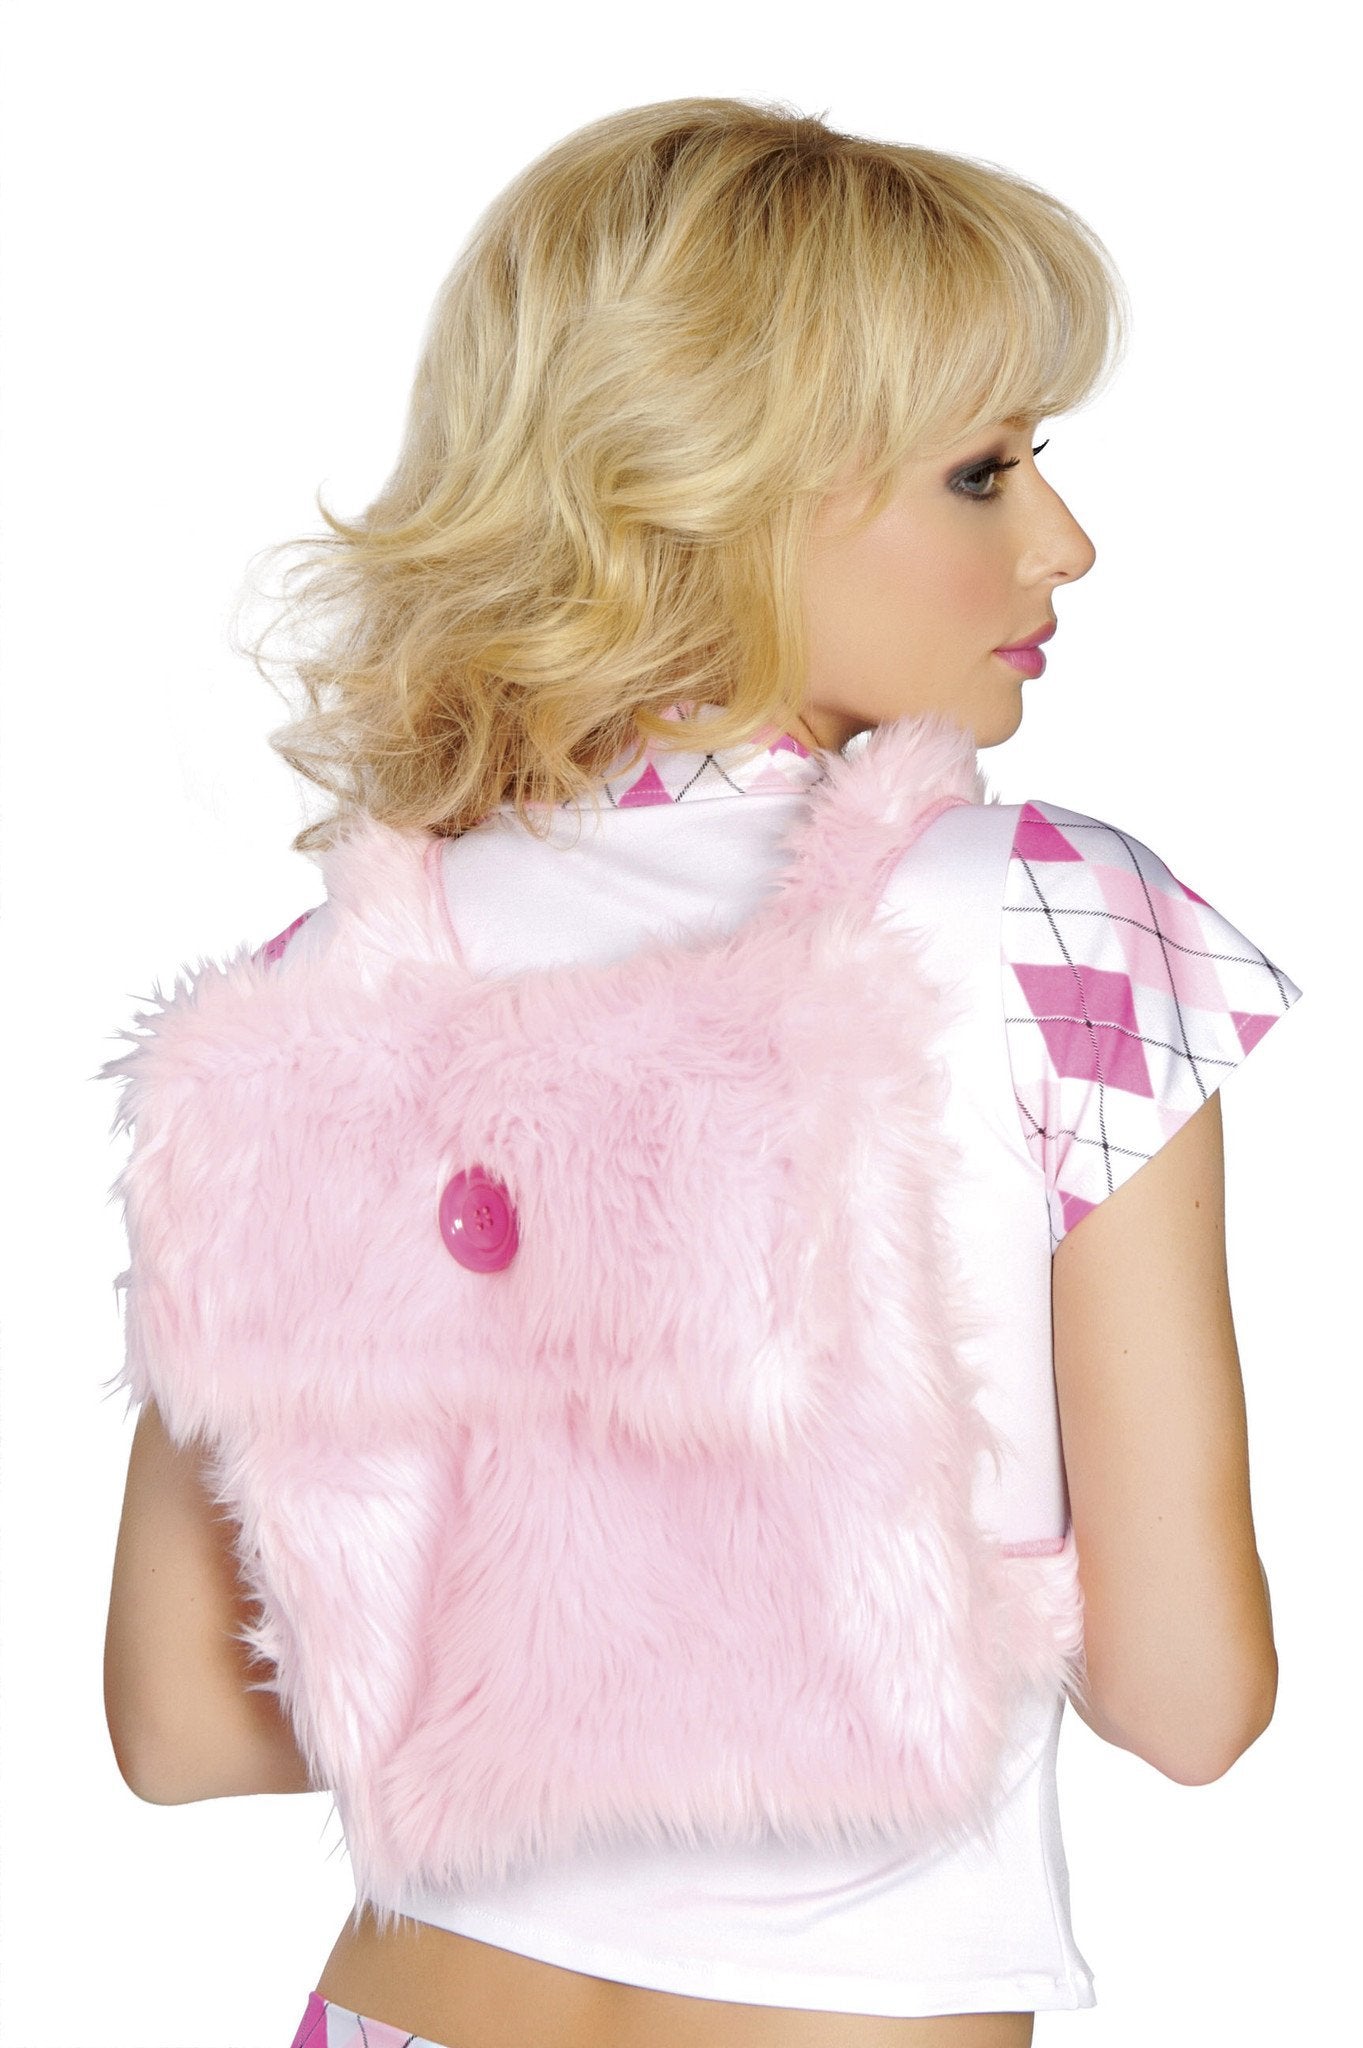 Buy Fur Back Pack from RomaRetailShop for 9.99 with Same Day Shipping Designed by Roma Costume BP4125-BP-O/S